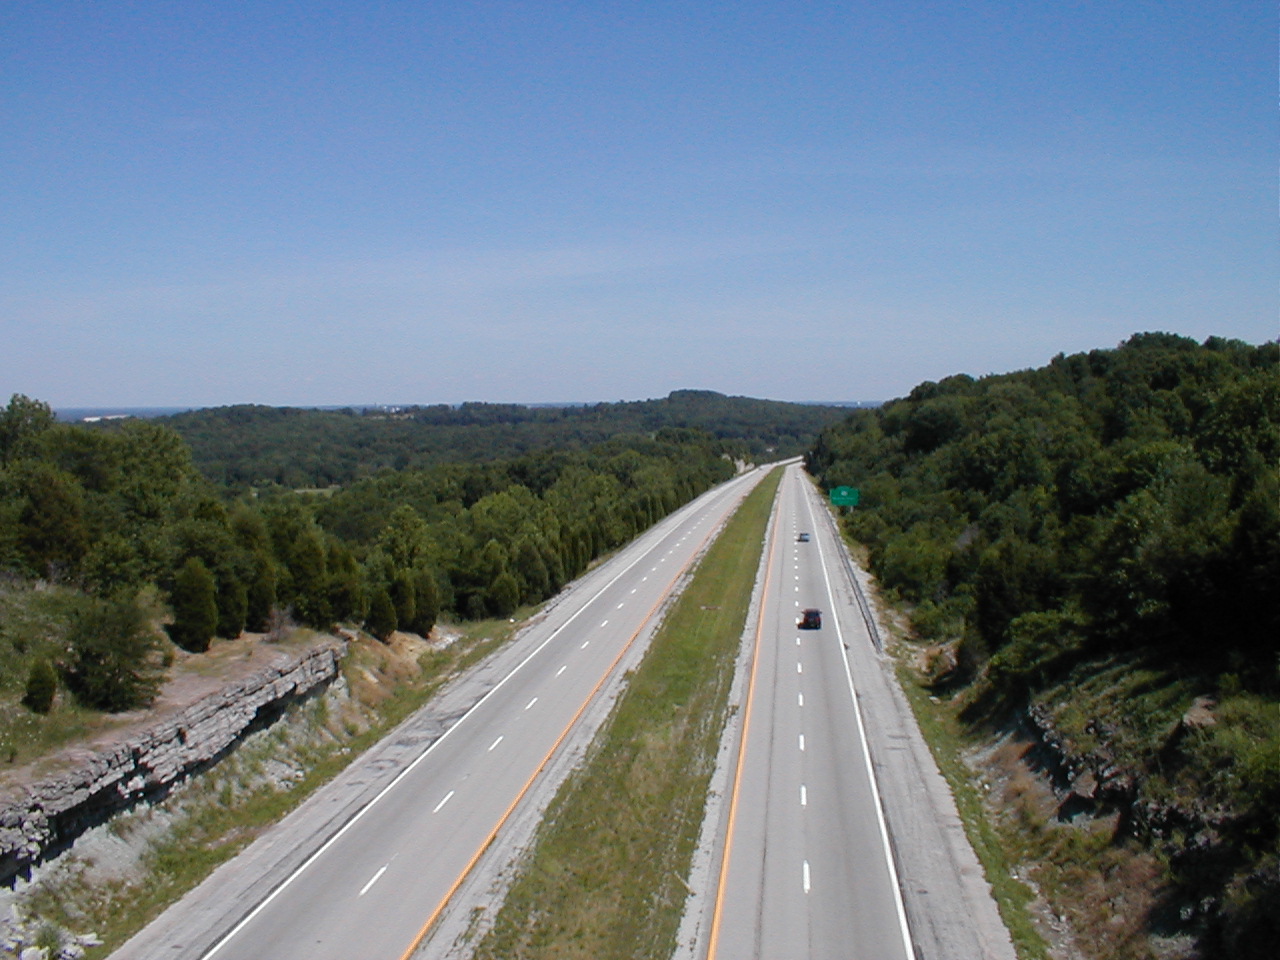 From the top of the bridge looking south over the parkway.